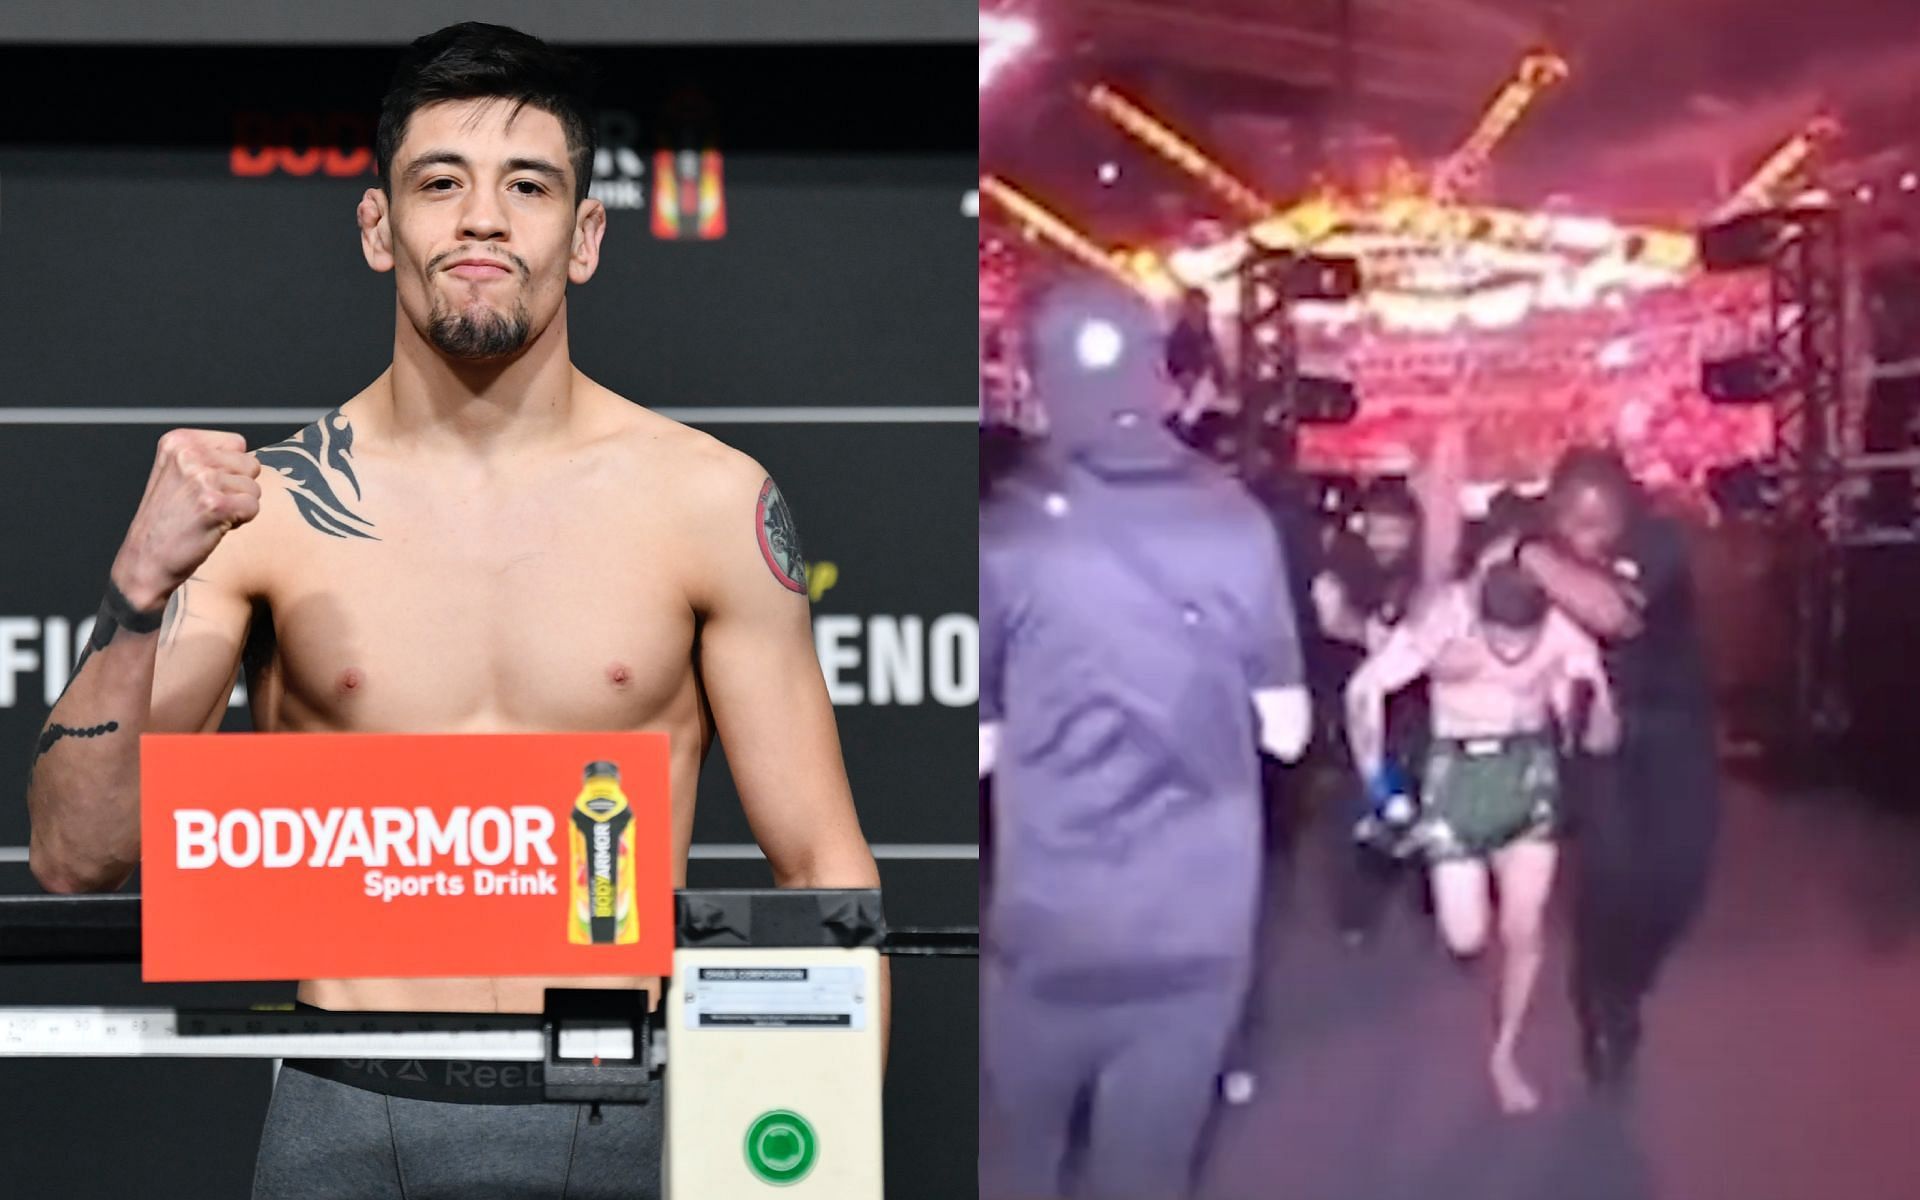 Brandon Moreno (left) and Brazil crowd throwing drinks at Brandon Moreno (right) [Image credits: Getty Images and @NinaDrama on YouTube]